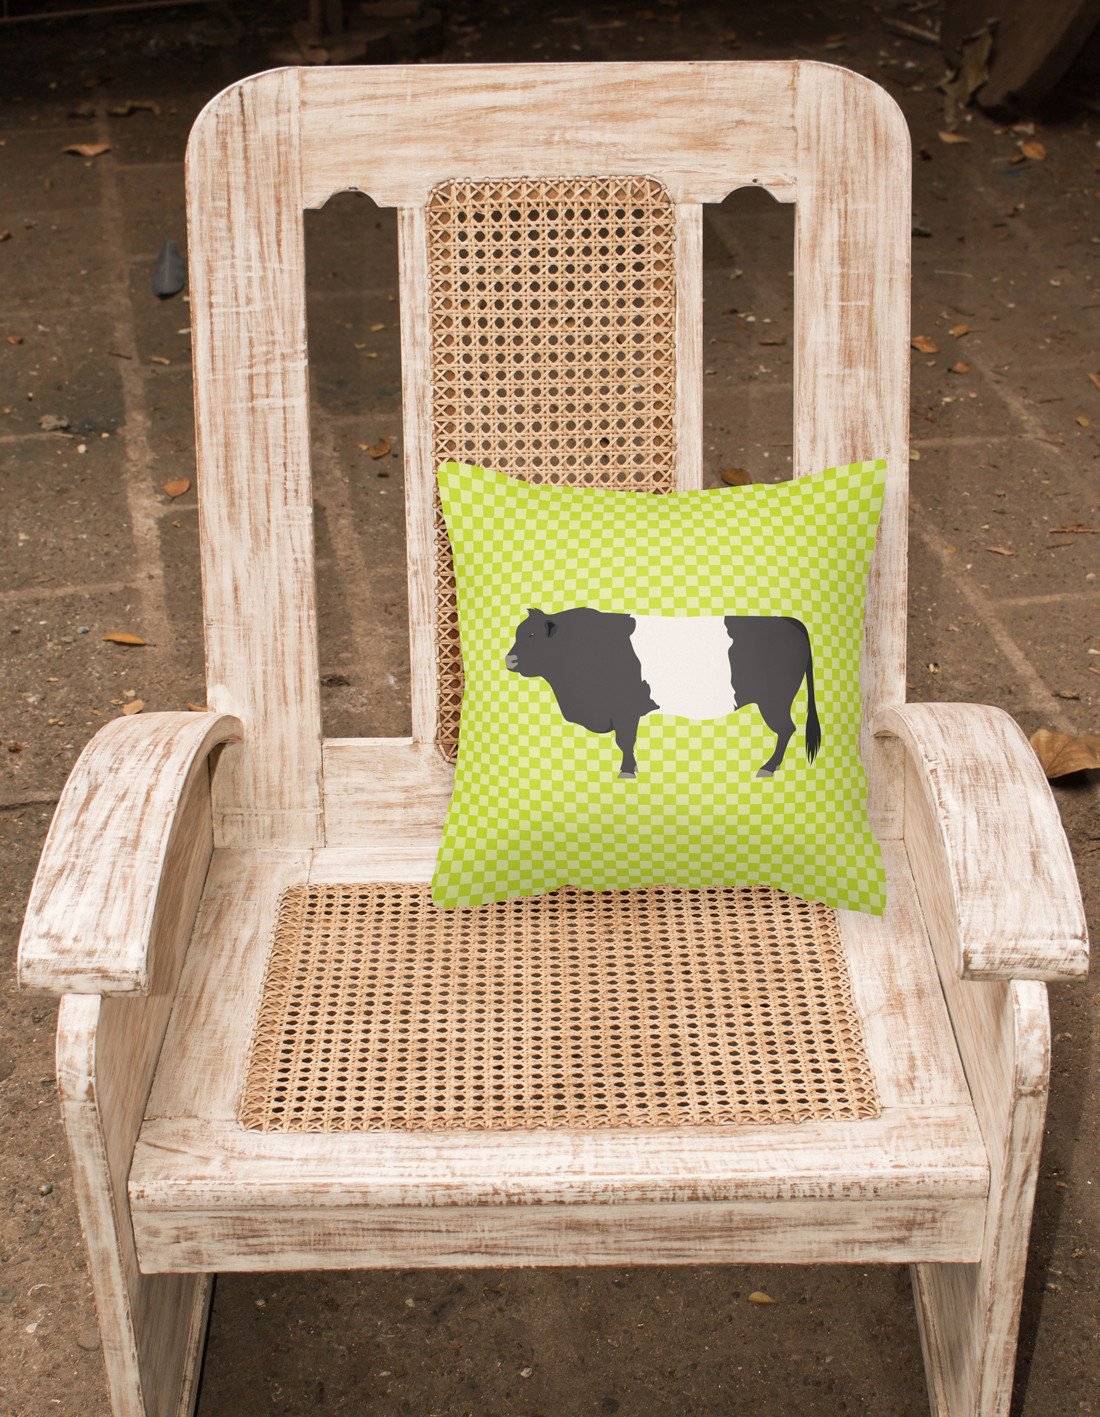 Belted Galloway Cow Green Fabric Decorative Pillow BB7657PW1818 by Caroline's Treasures